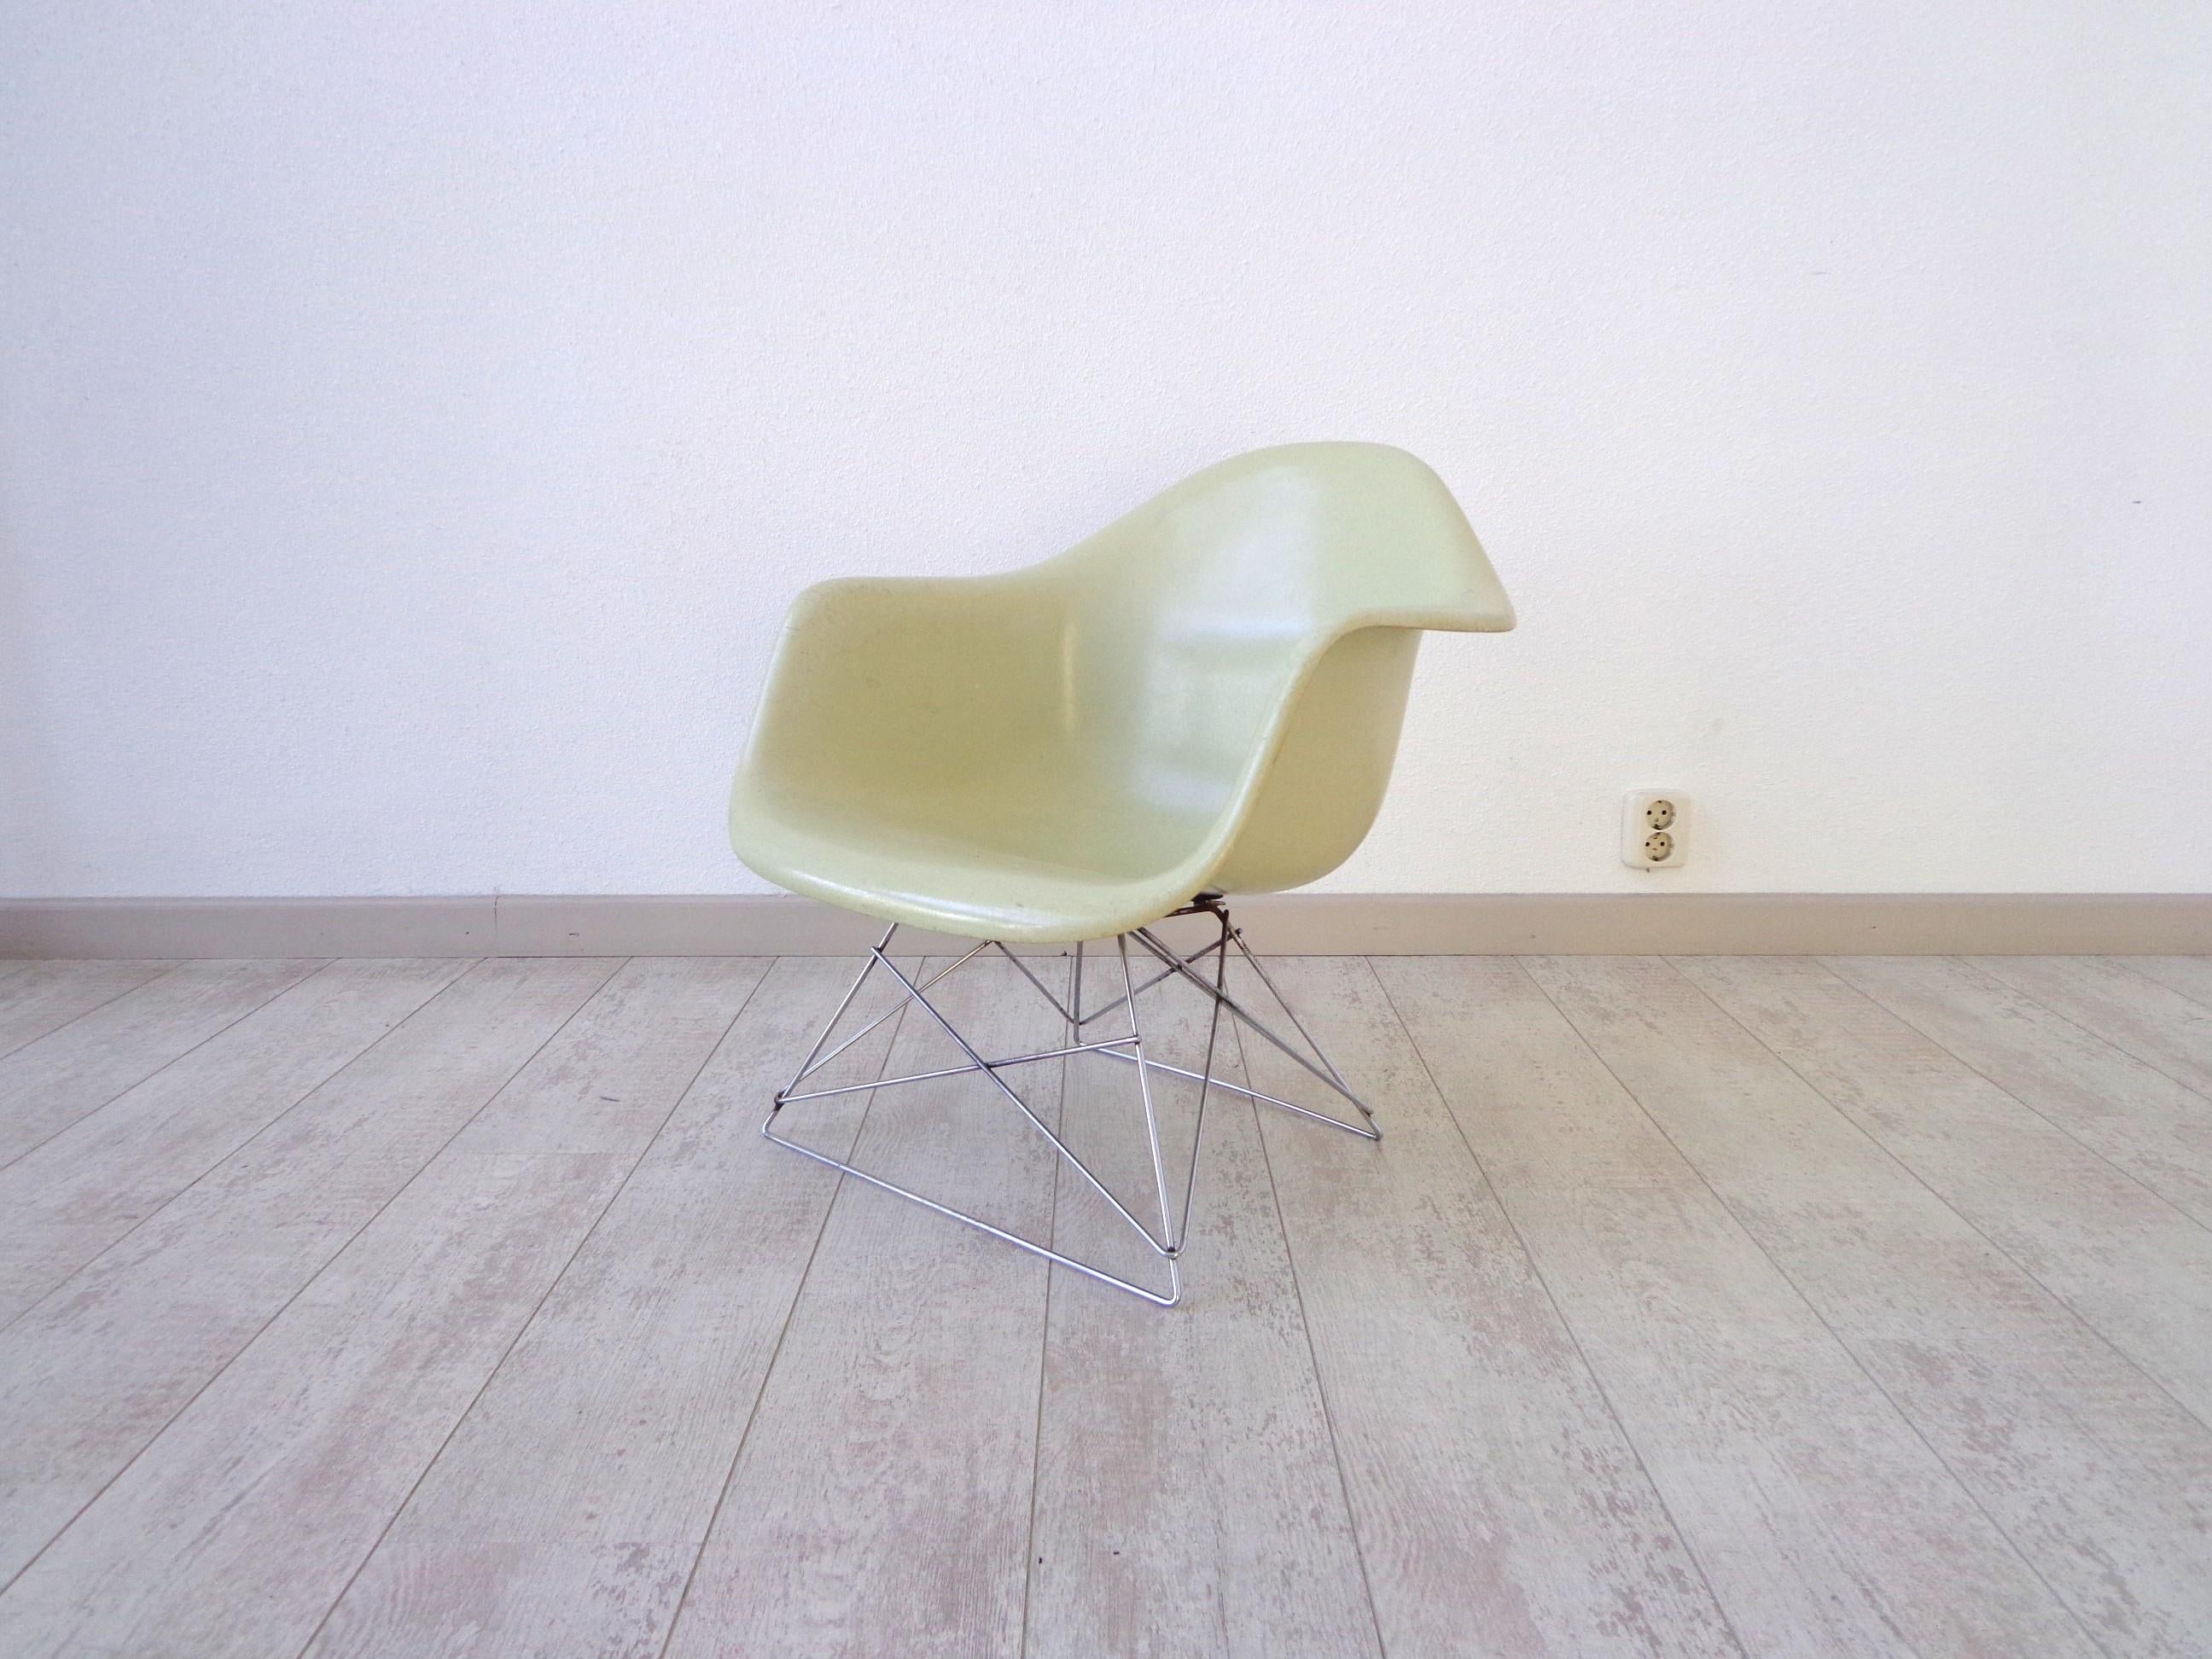 American LAR Armchair by Charles & Ray Eames for Herman Miller 1960s